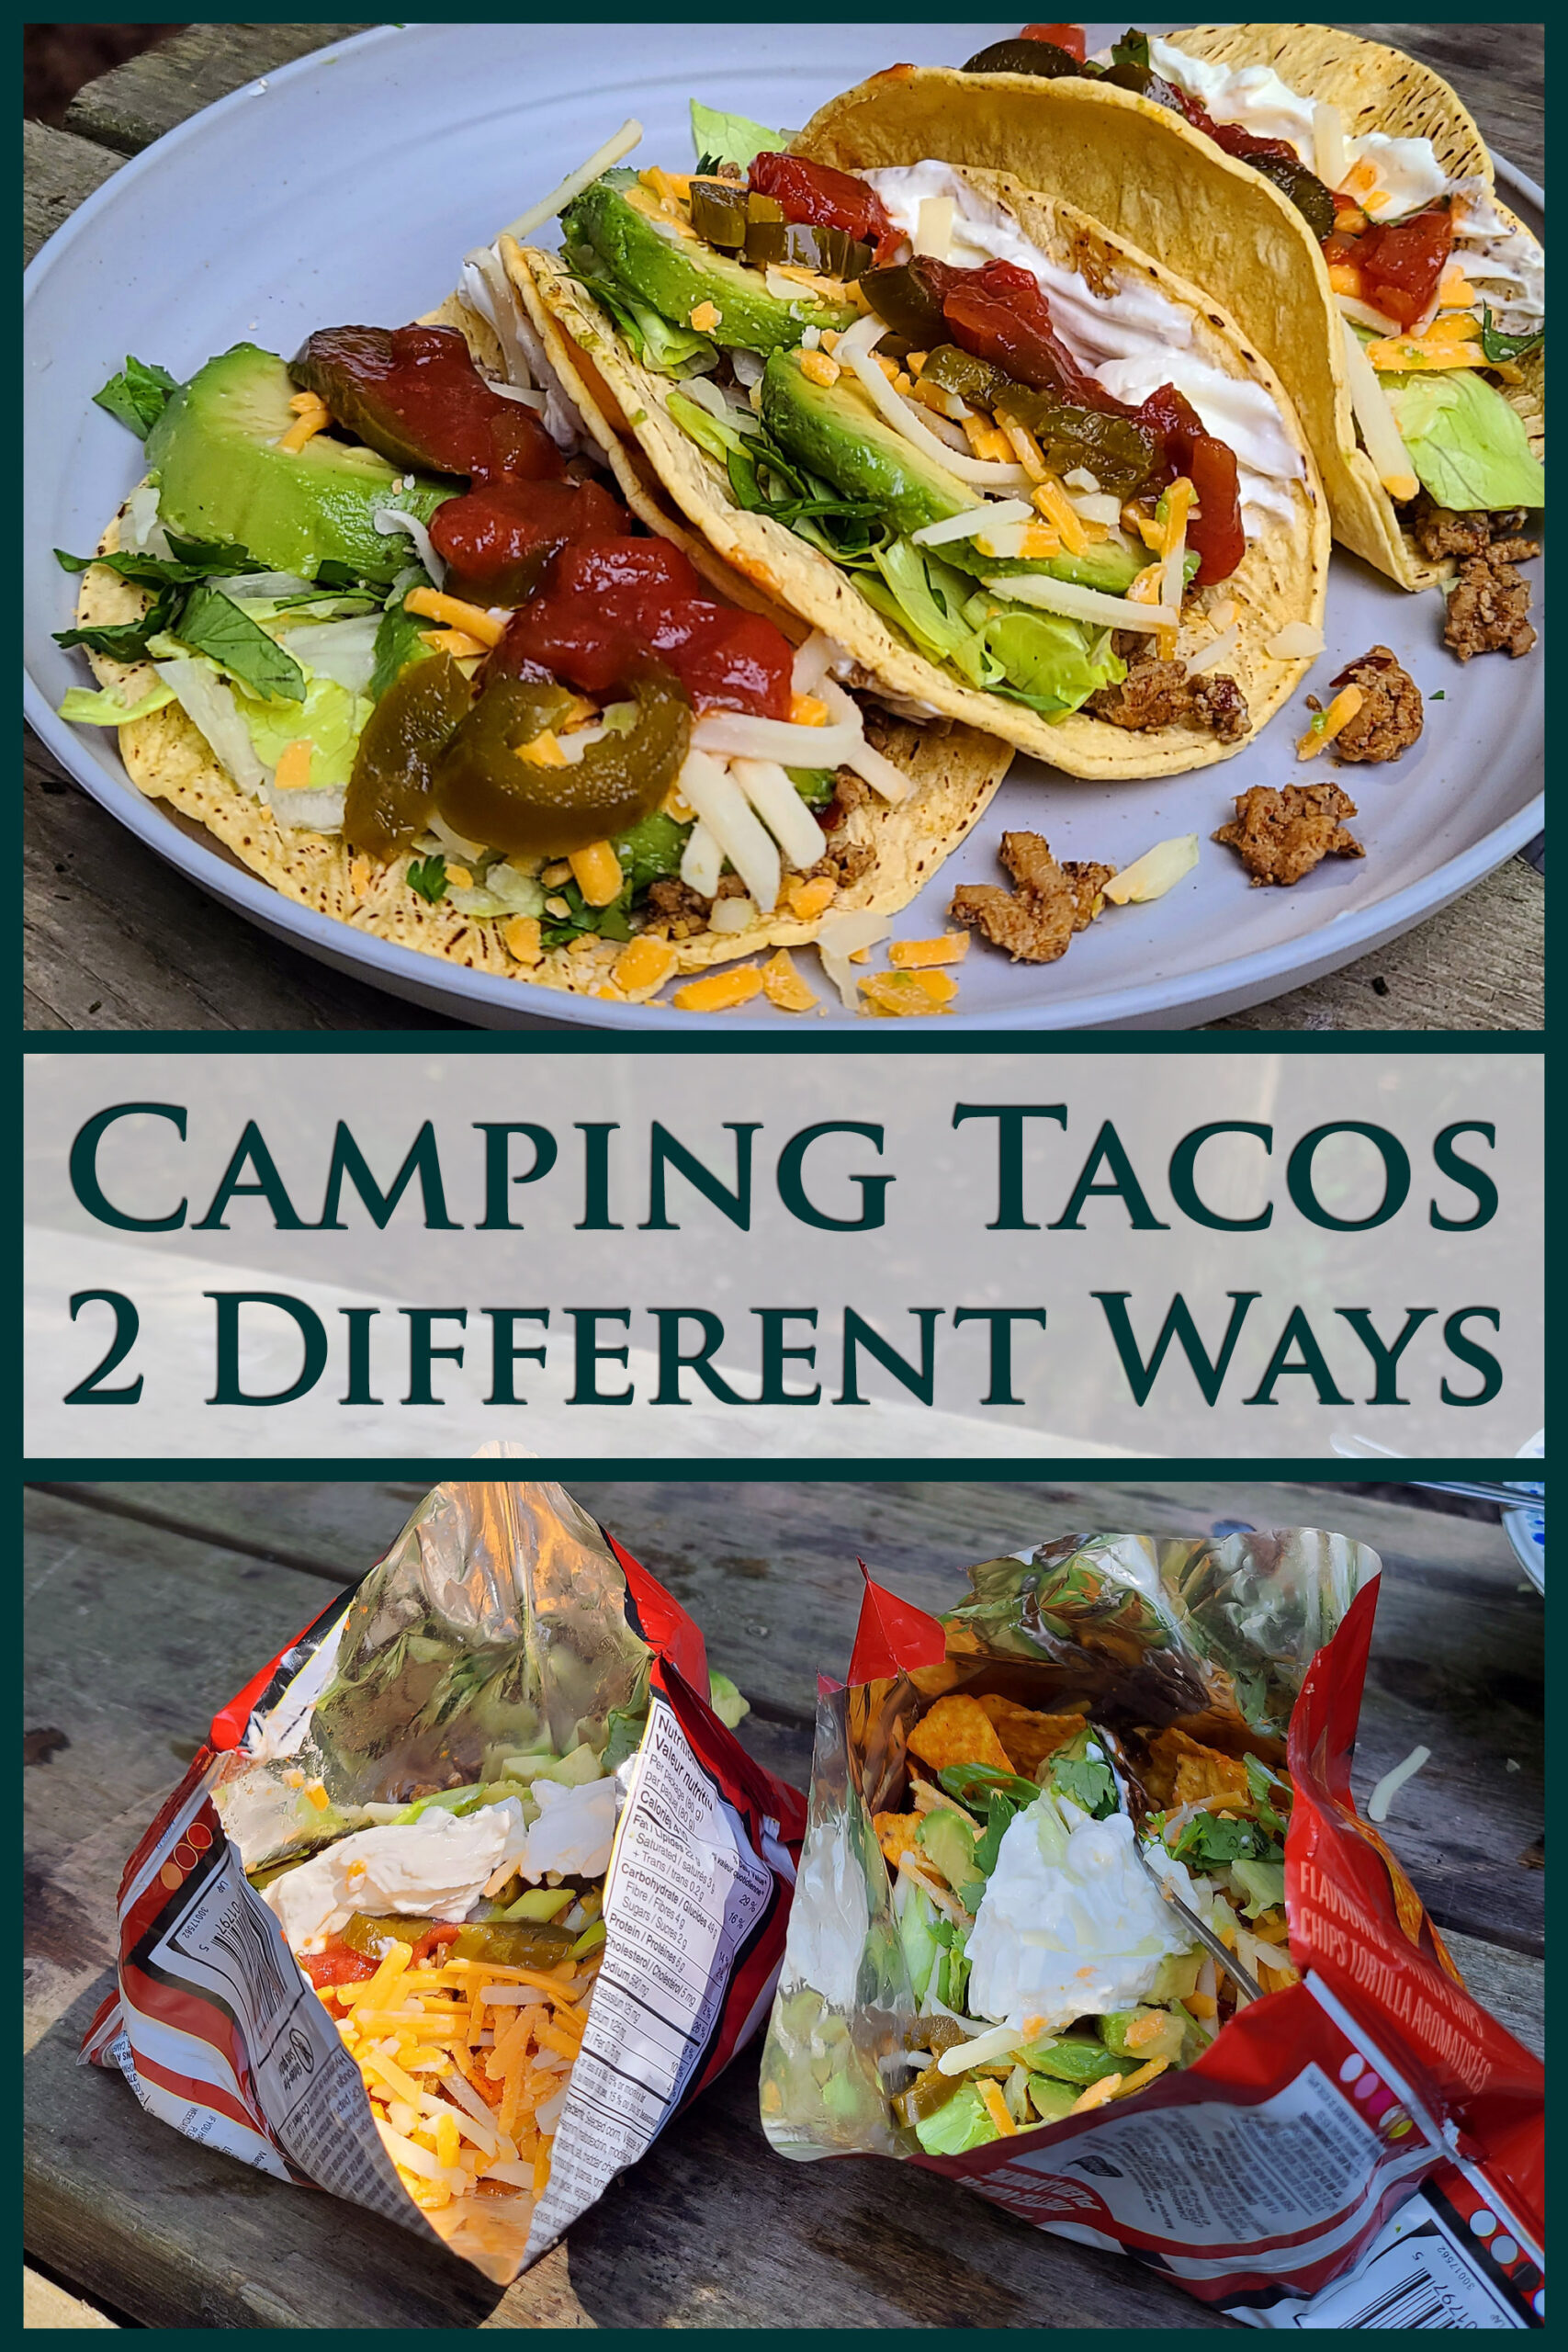 A 2 part image showing traditional and walking tacos, with overlaid text that says camping tacos 2 different ways.